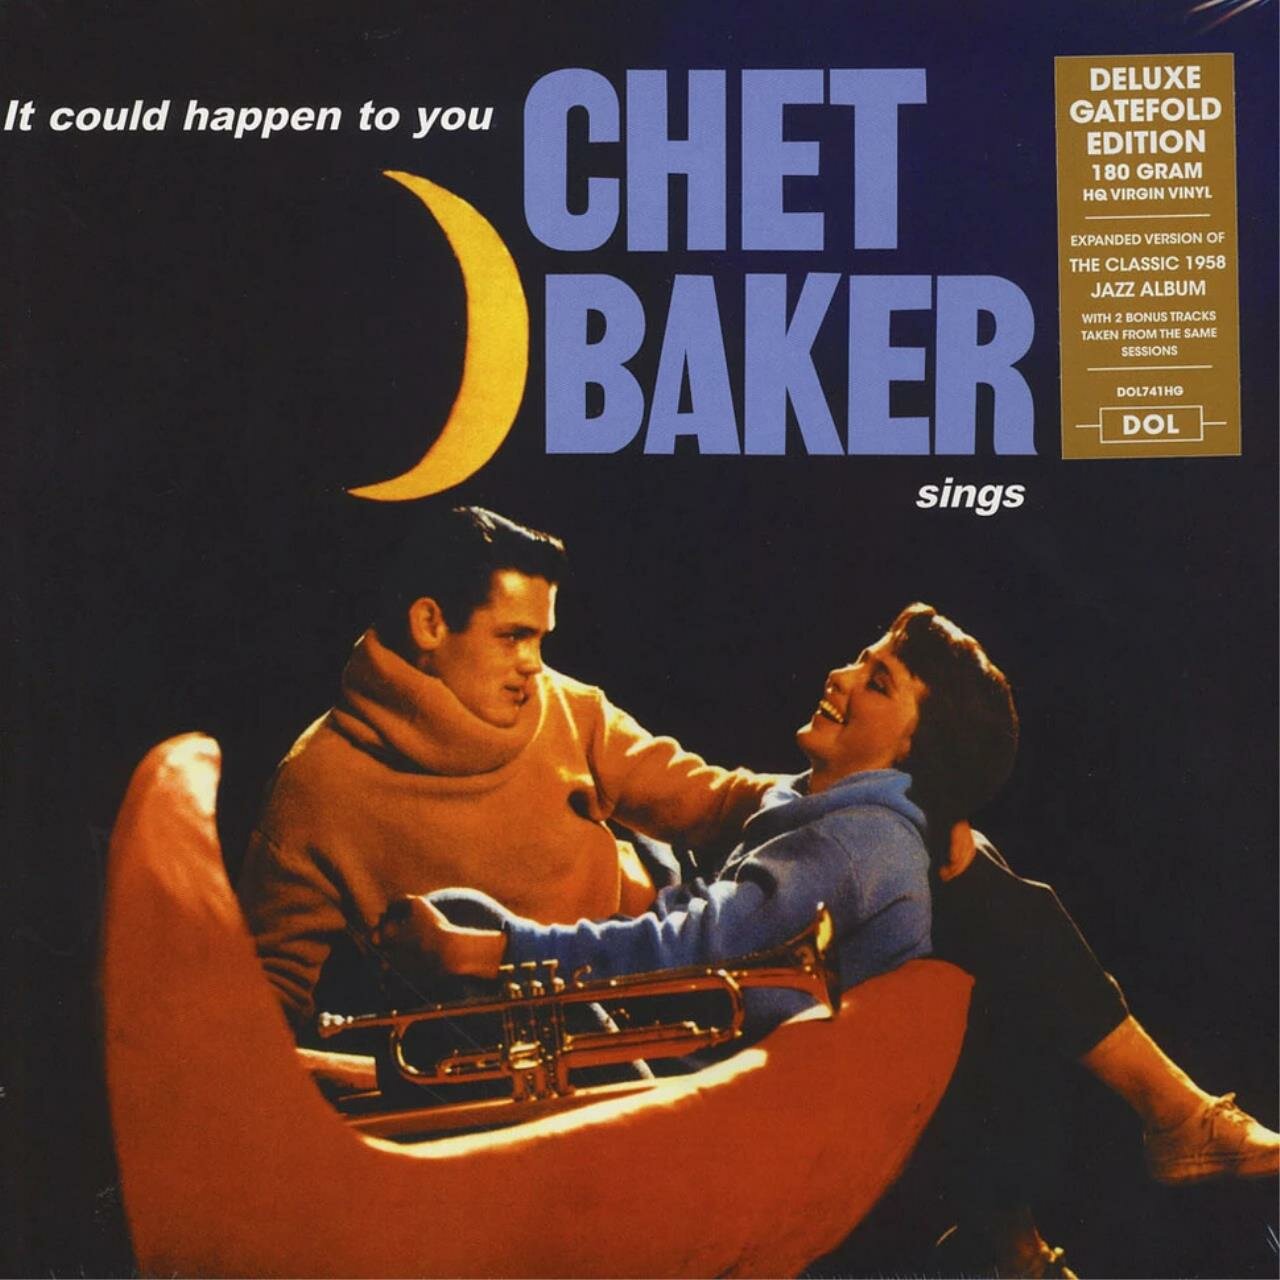 Виниловая пластинка Chet Baker - It Could Happen To You - Chet Baker Sings